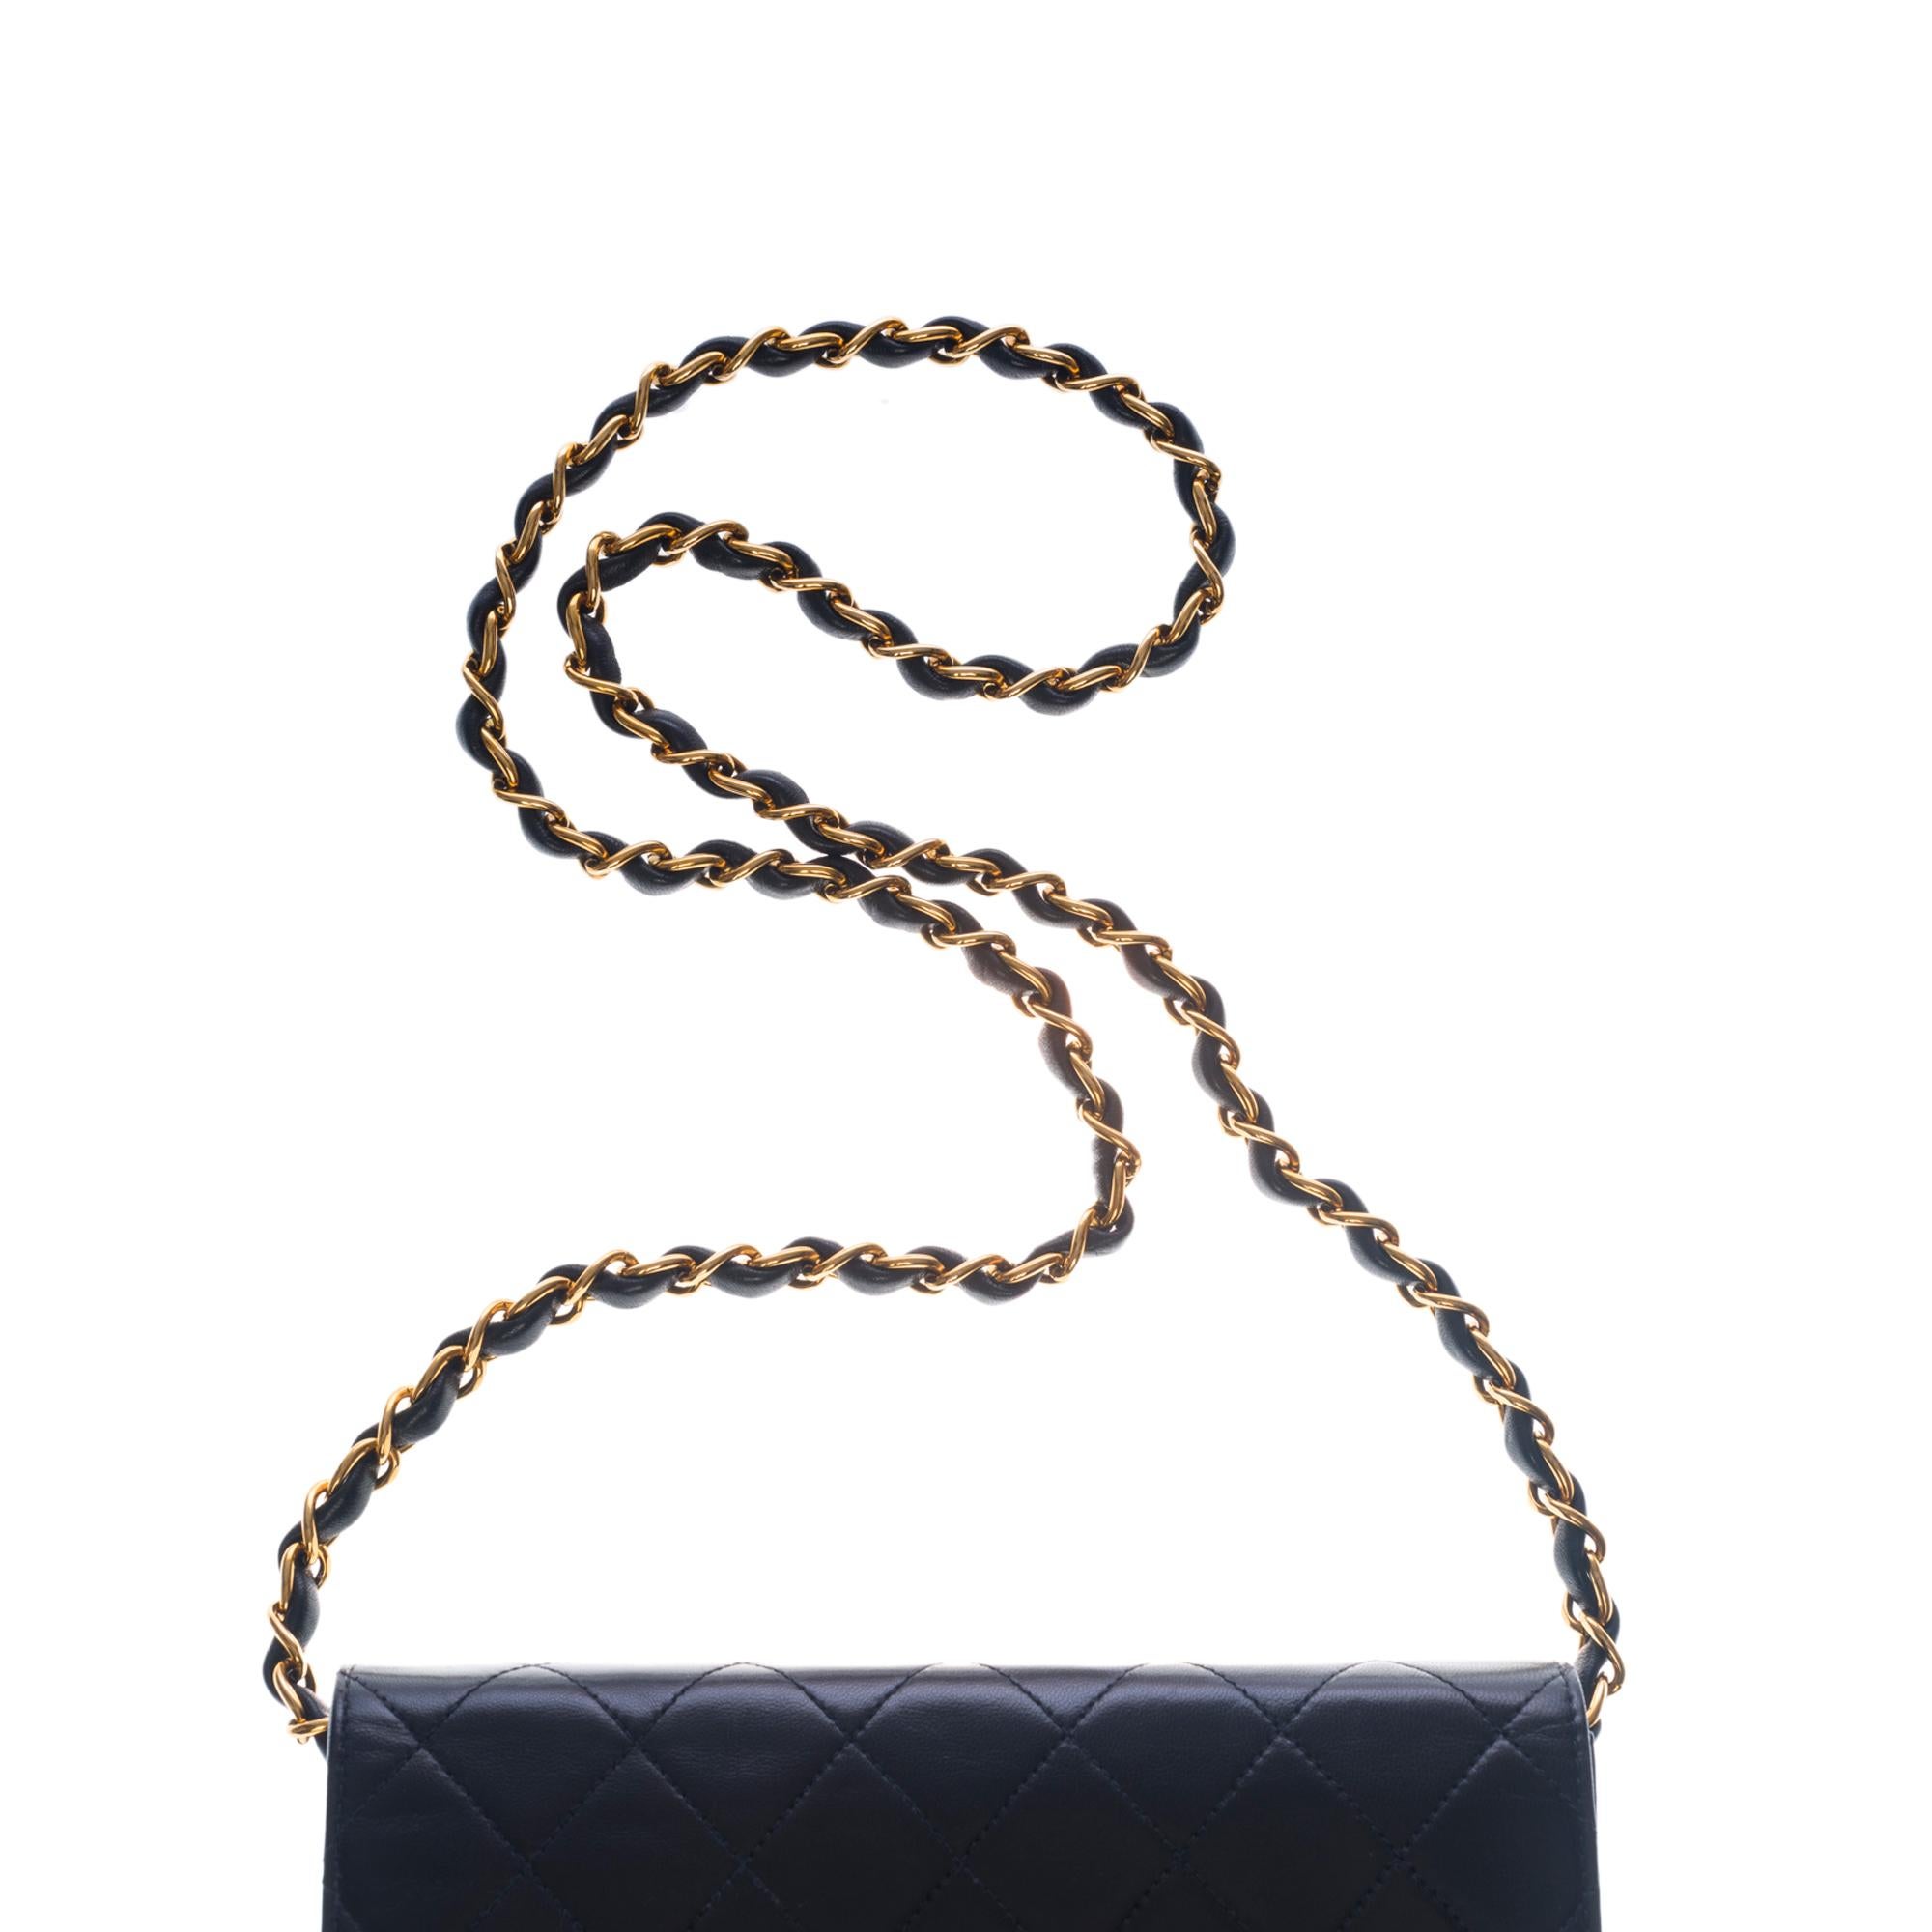 Chanel Classic Mini Full Flap shoulder bag in black quilted lambskin leather, GHW 4